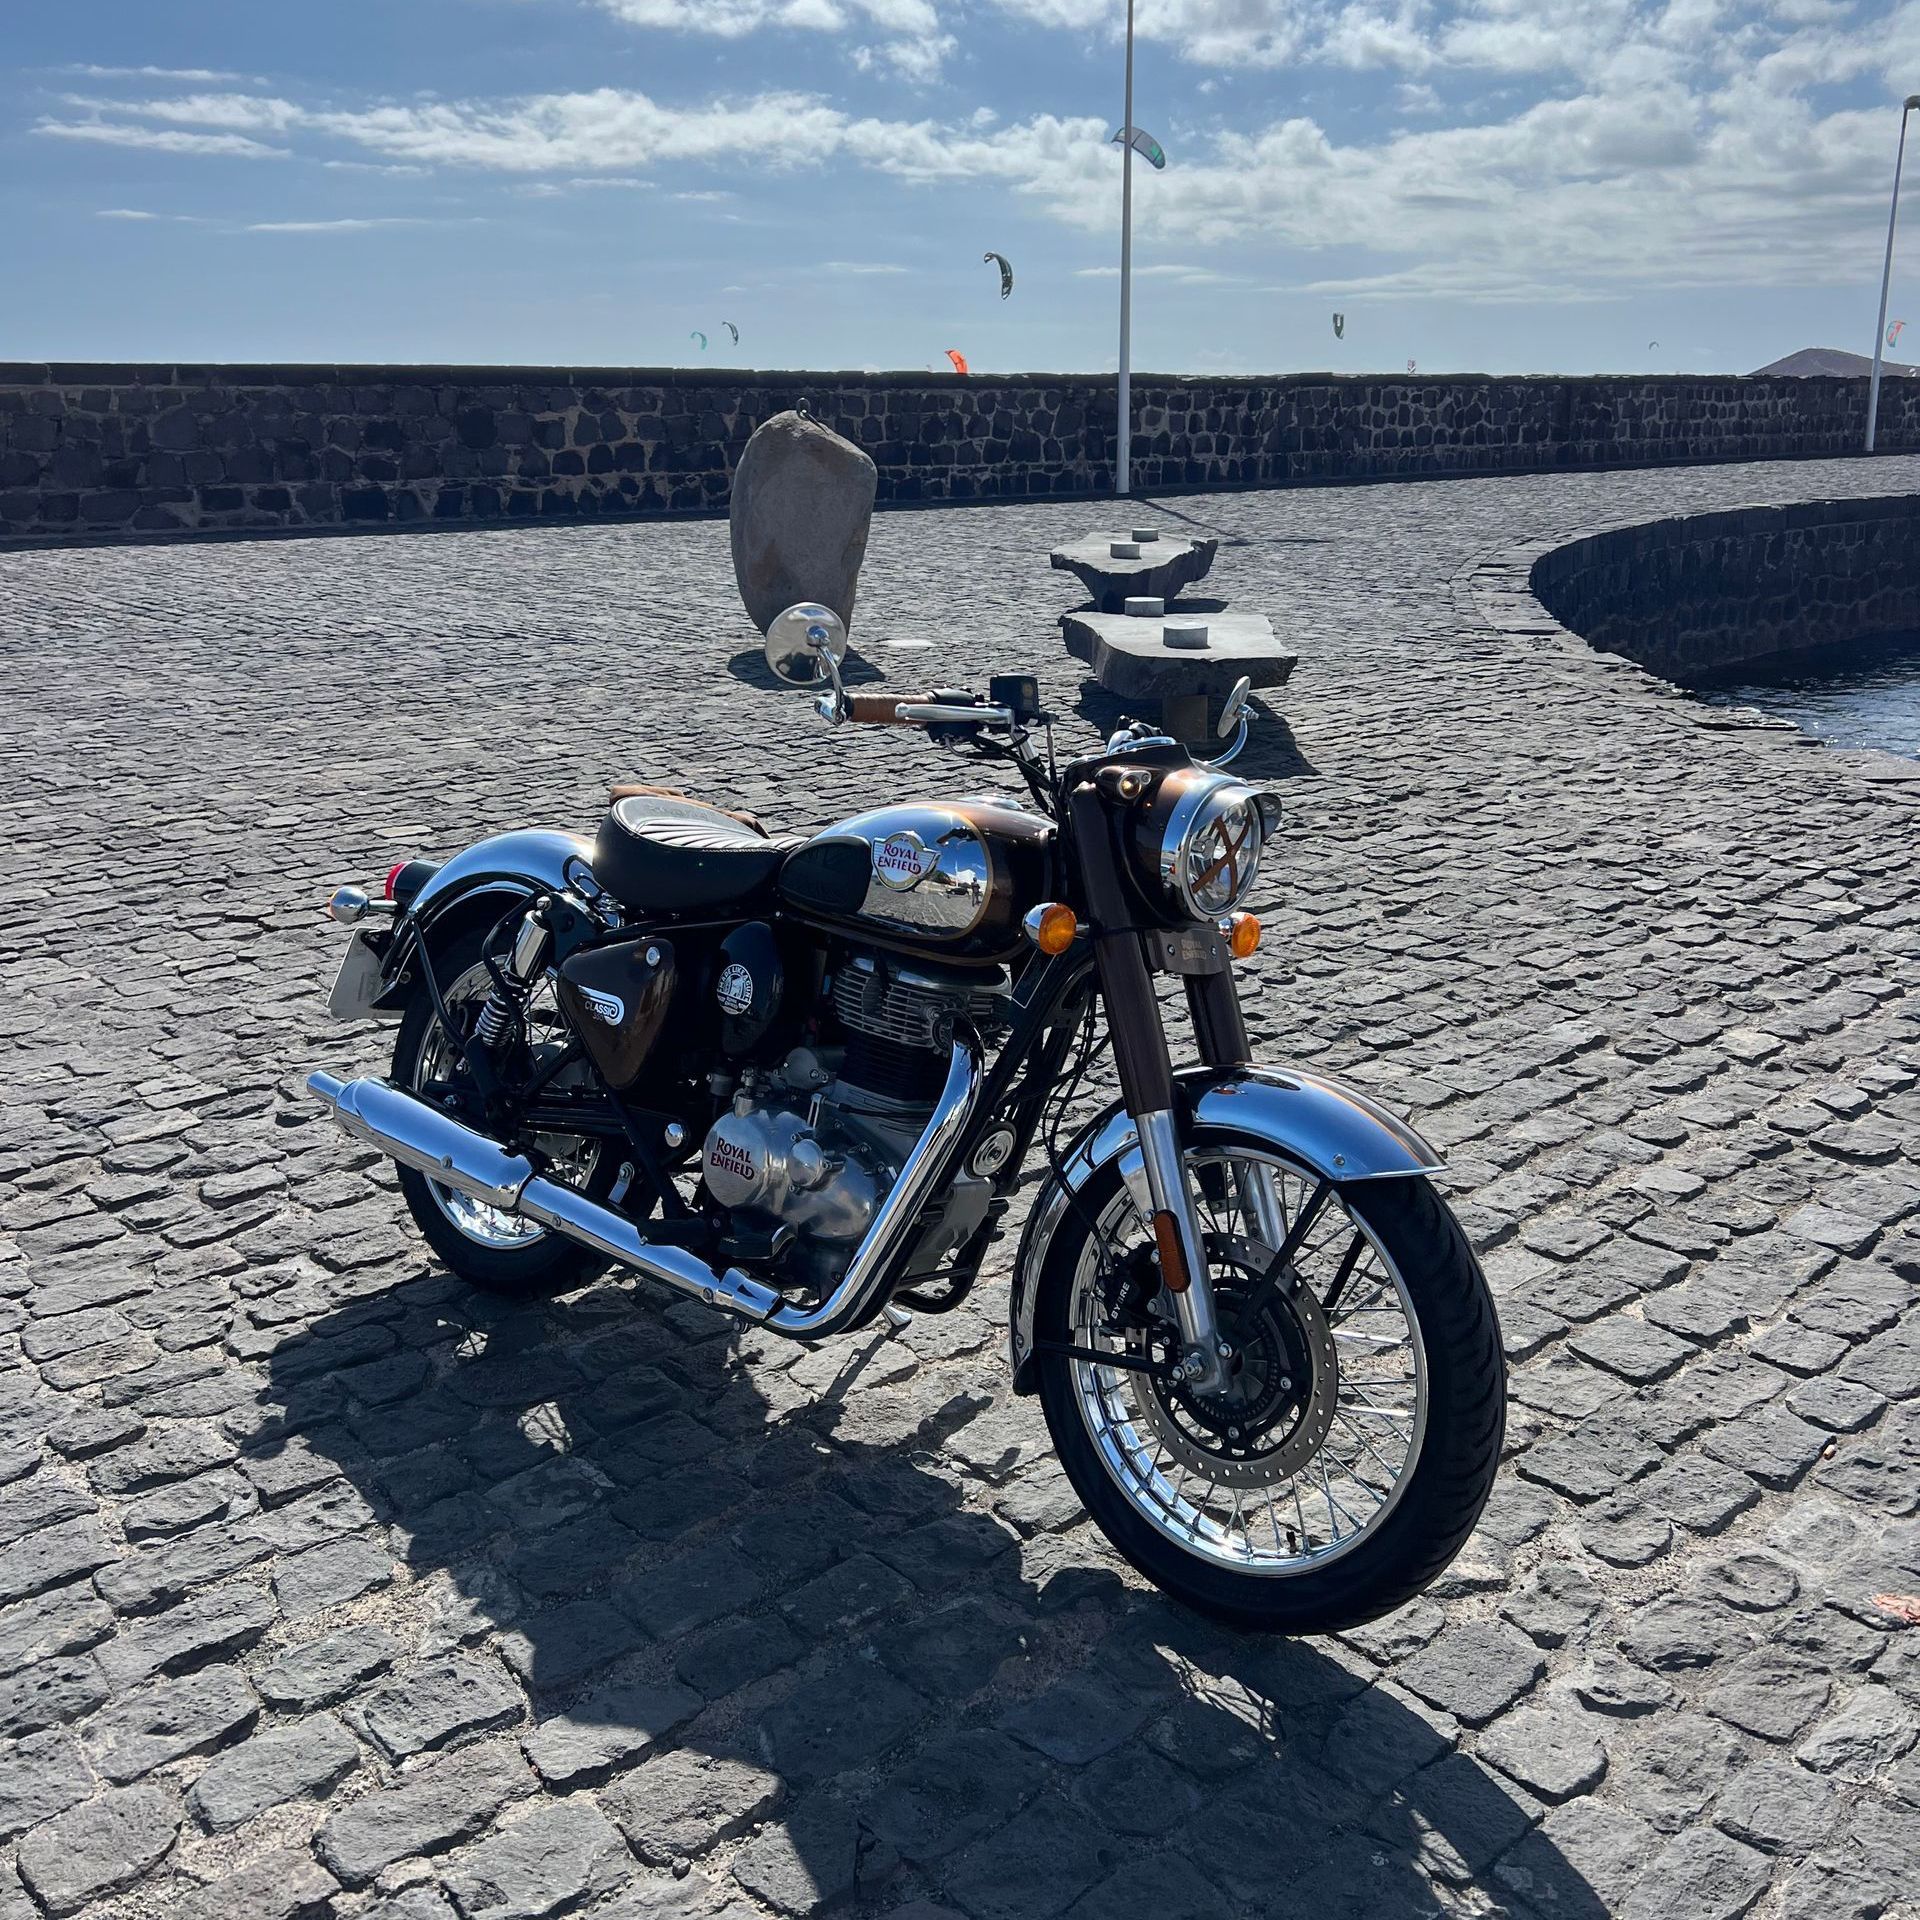 A motorcycle is parked on a cobblestone road